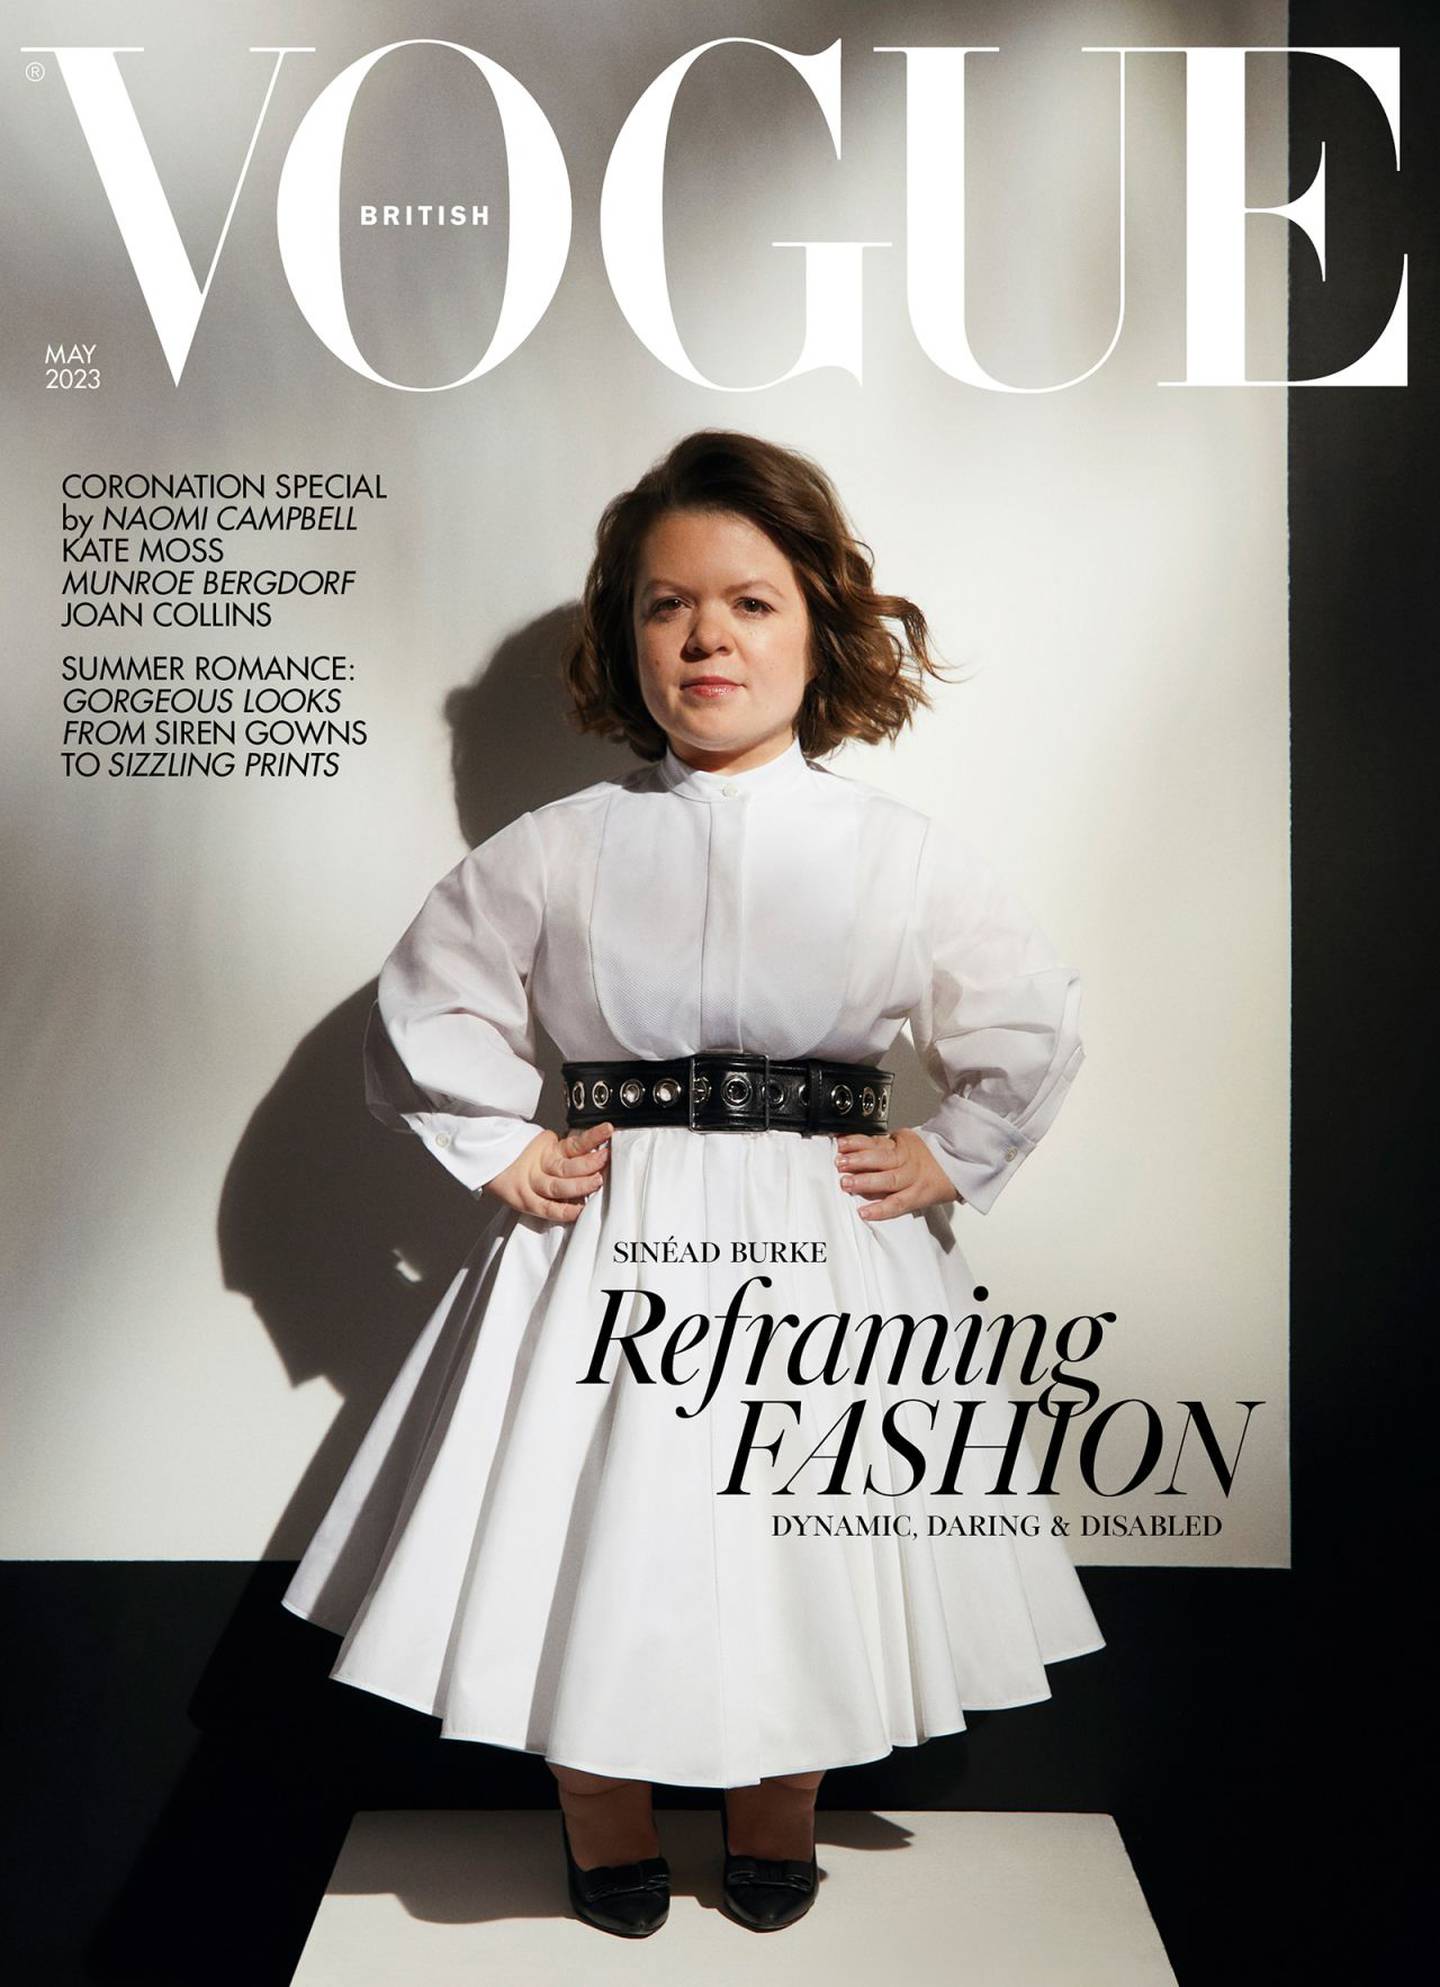 Sinéad Burke on the cover of the May 2023 edition of Vogue.